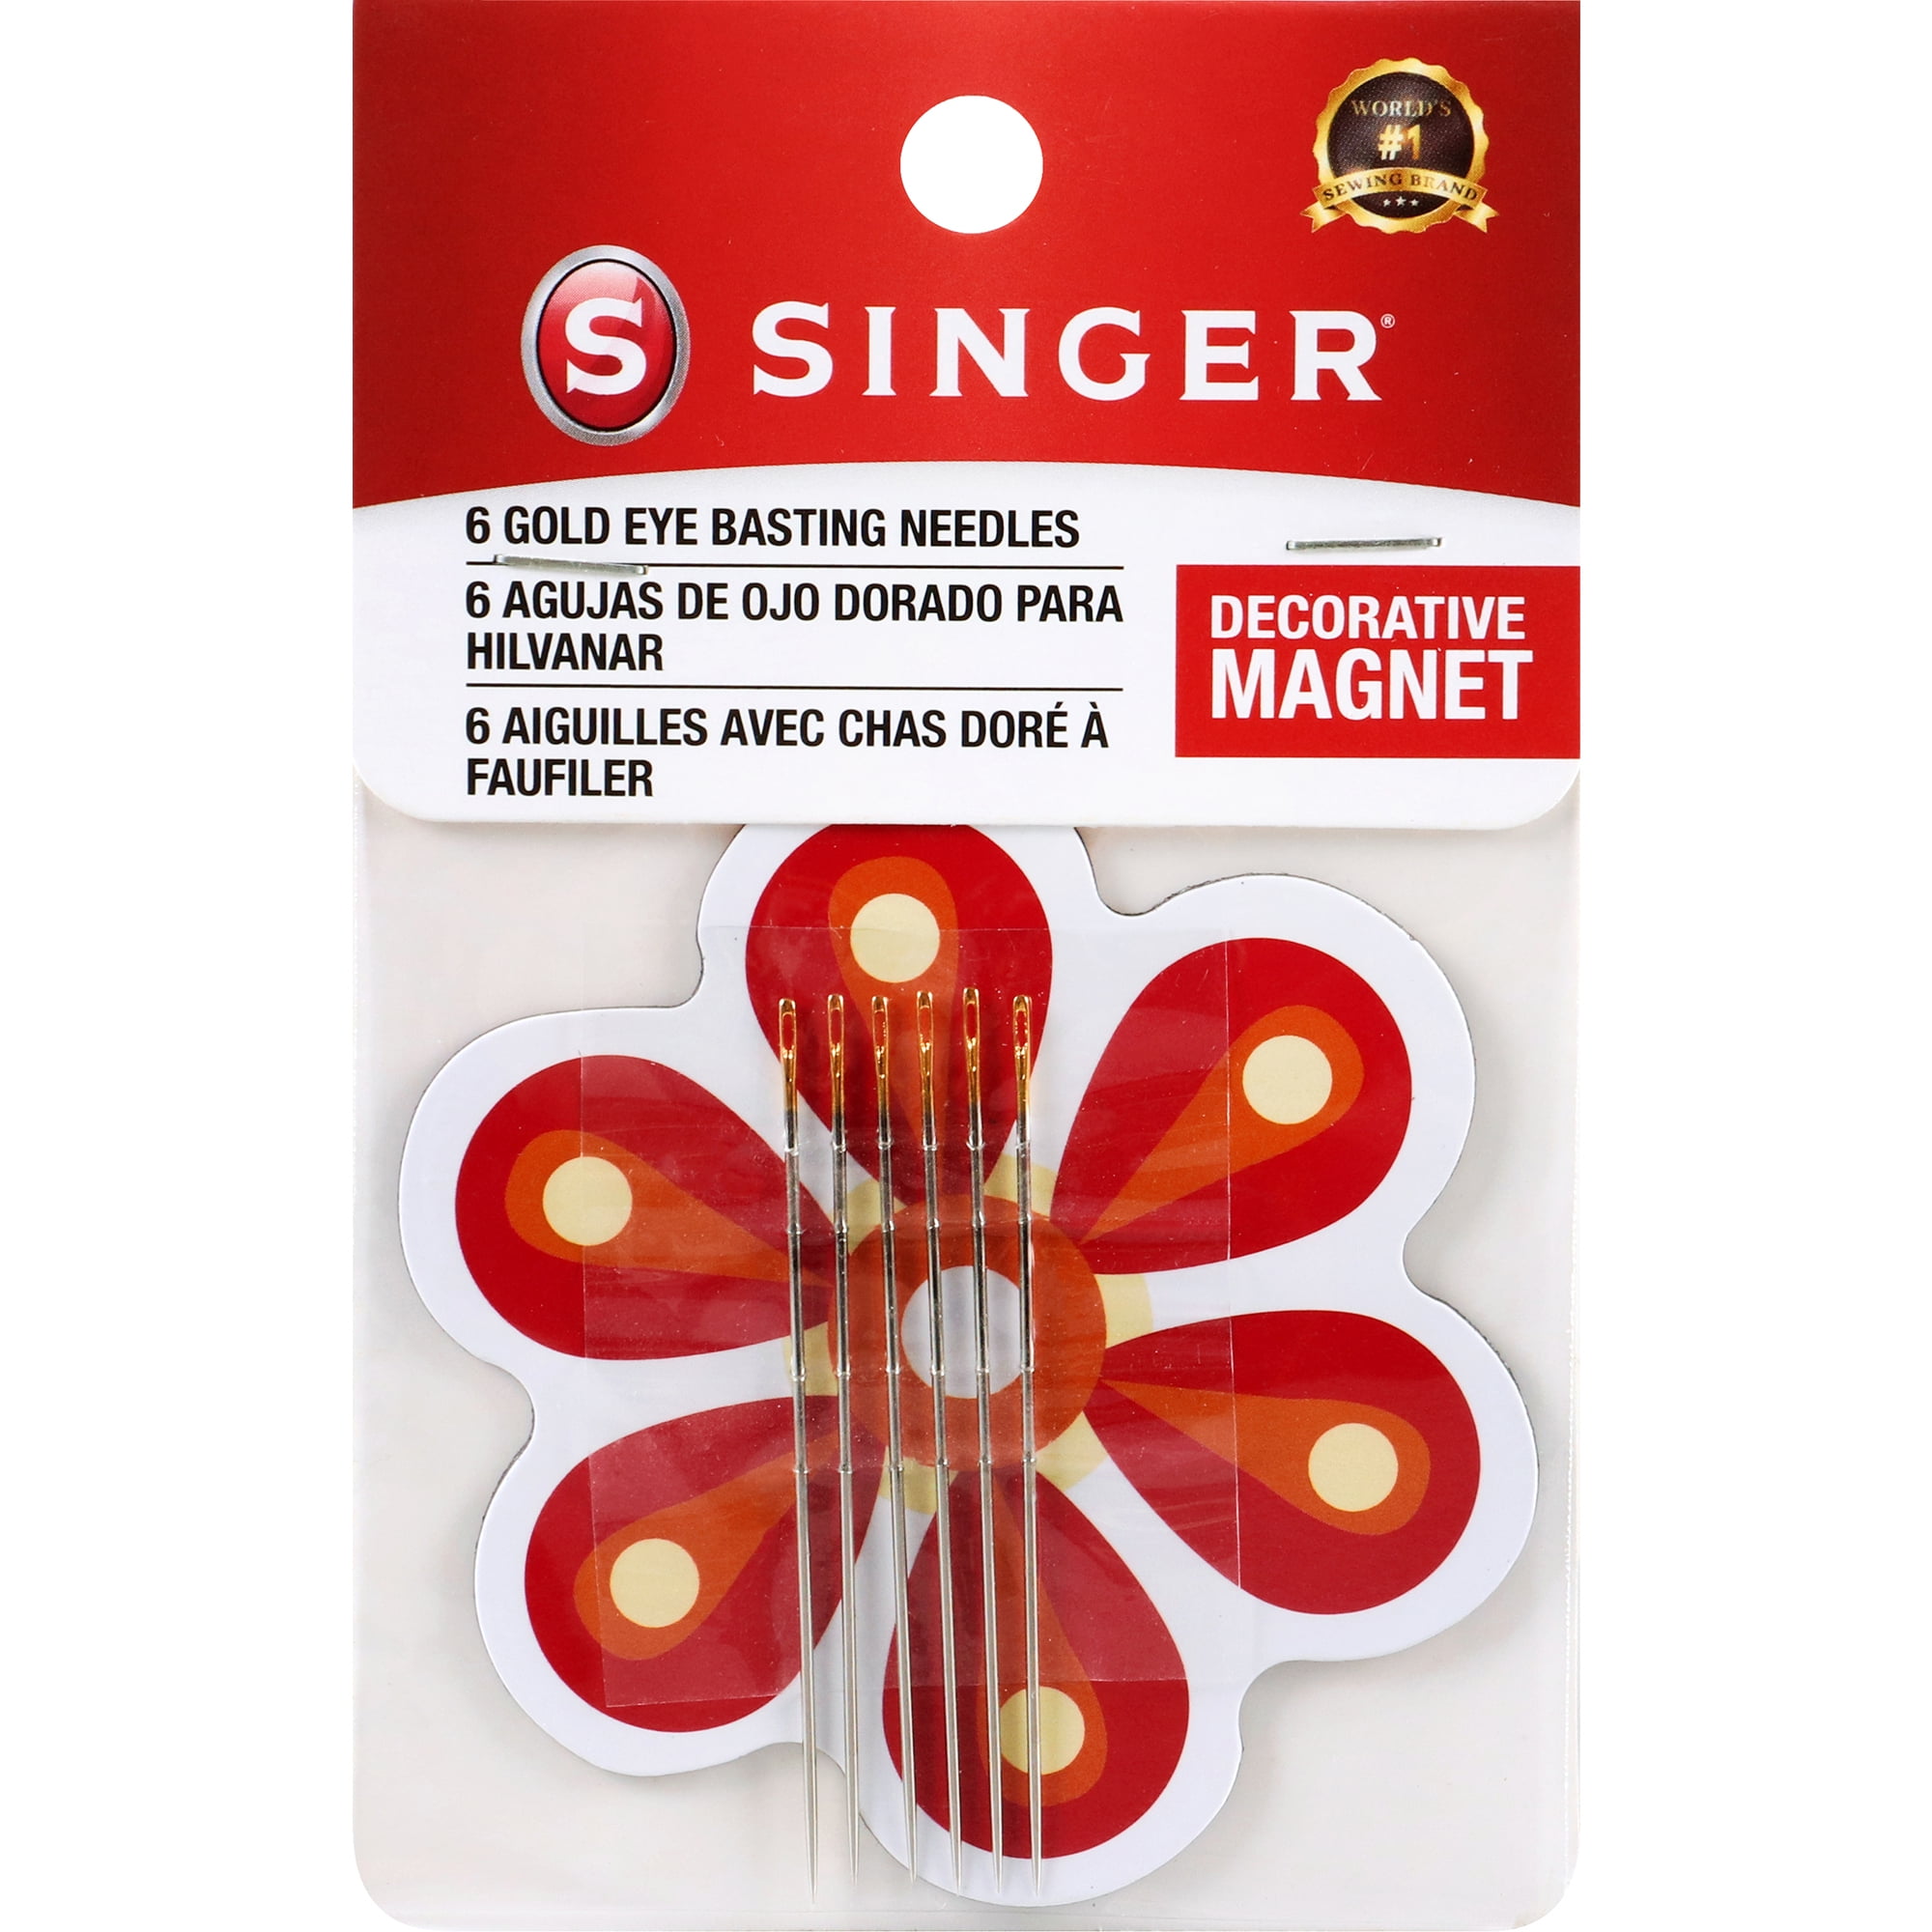 SINGER Gold Eye Basting Needles with Decorative Magnet, 6 Count